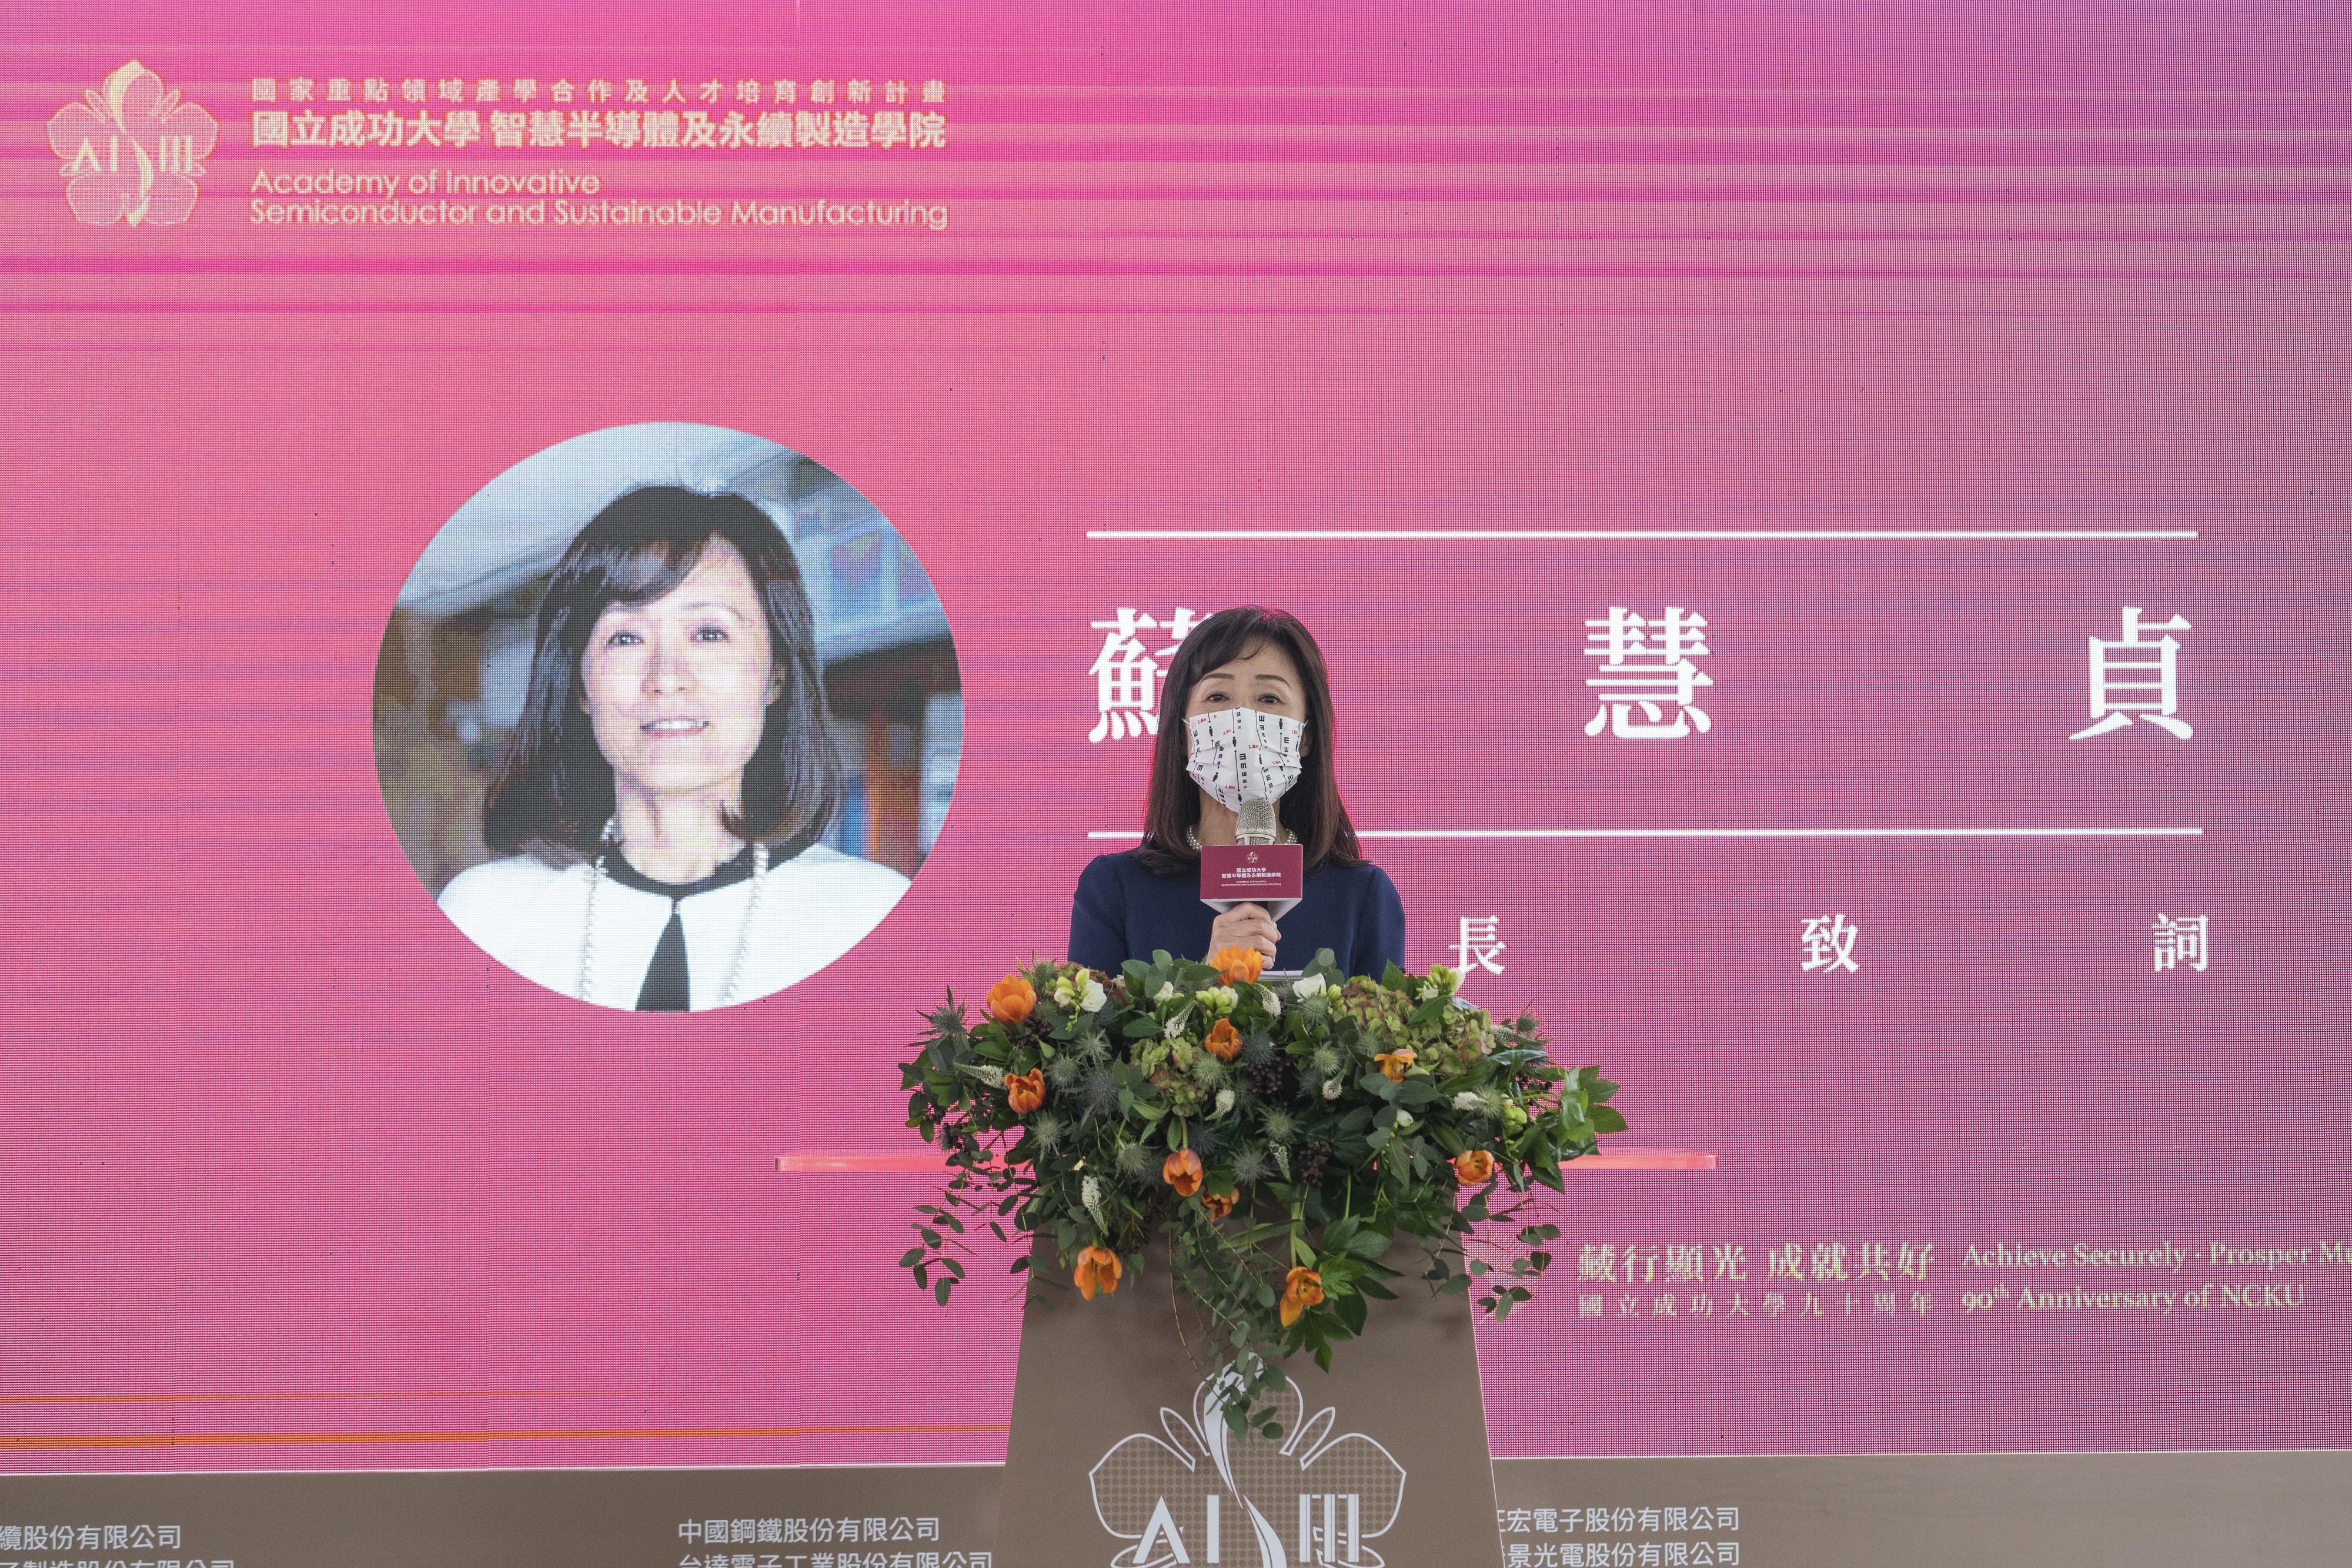 The Principal of National Cheng Kung University, Su Hui Zhen, plans new curriculum for students. (Photo / Provided by NCKU)